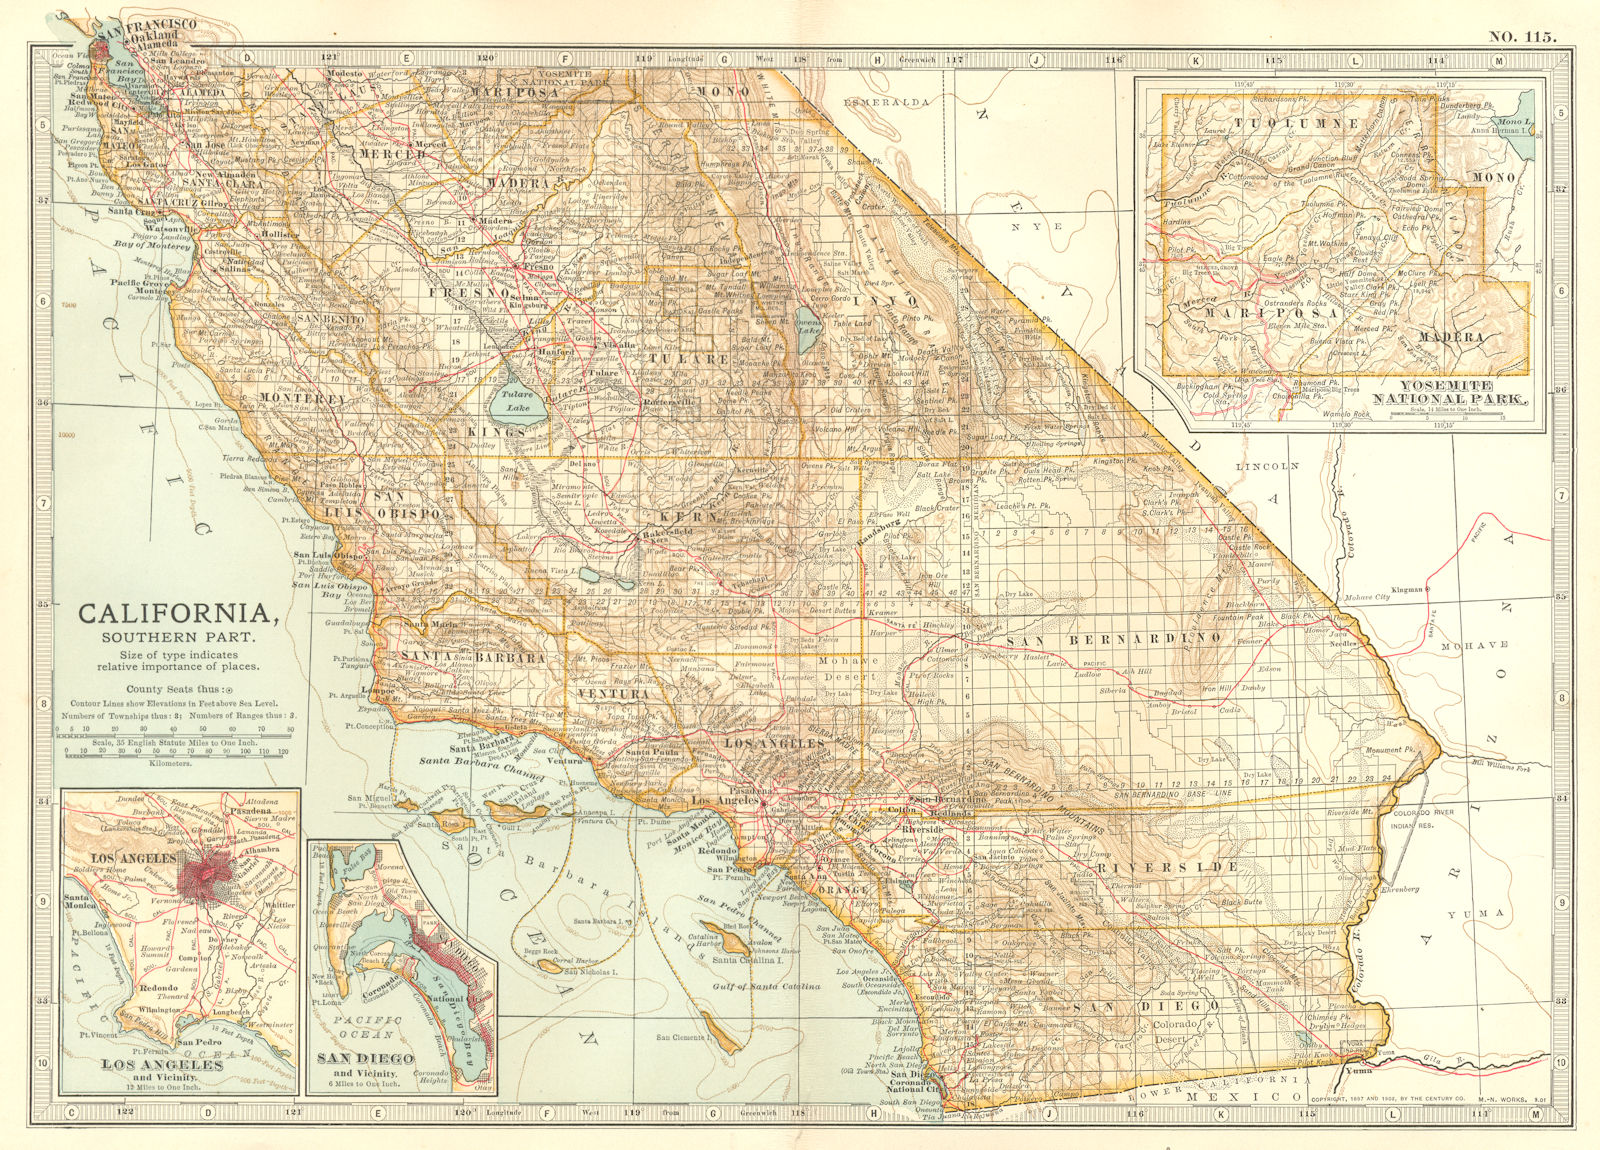 Associate Product CALIFORNIA. South; Los Angeles, San Diego, Yosemite national park 1903 old map